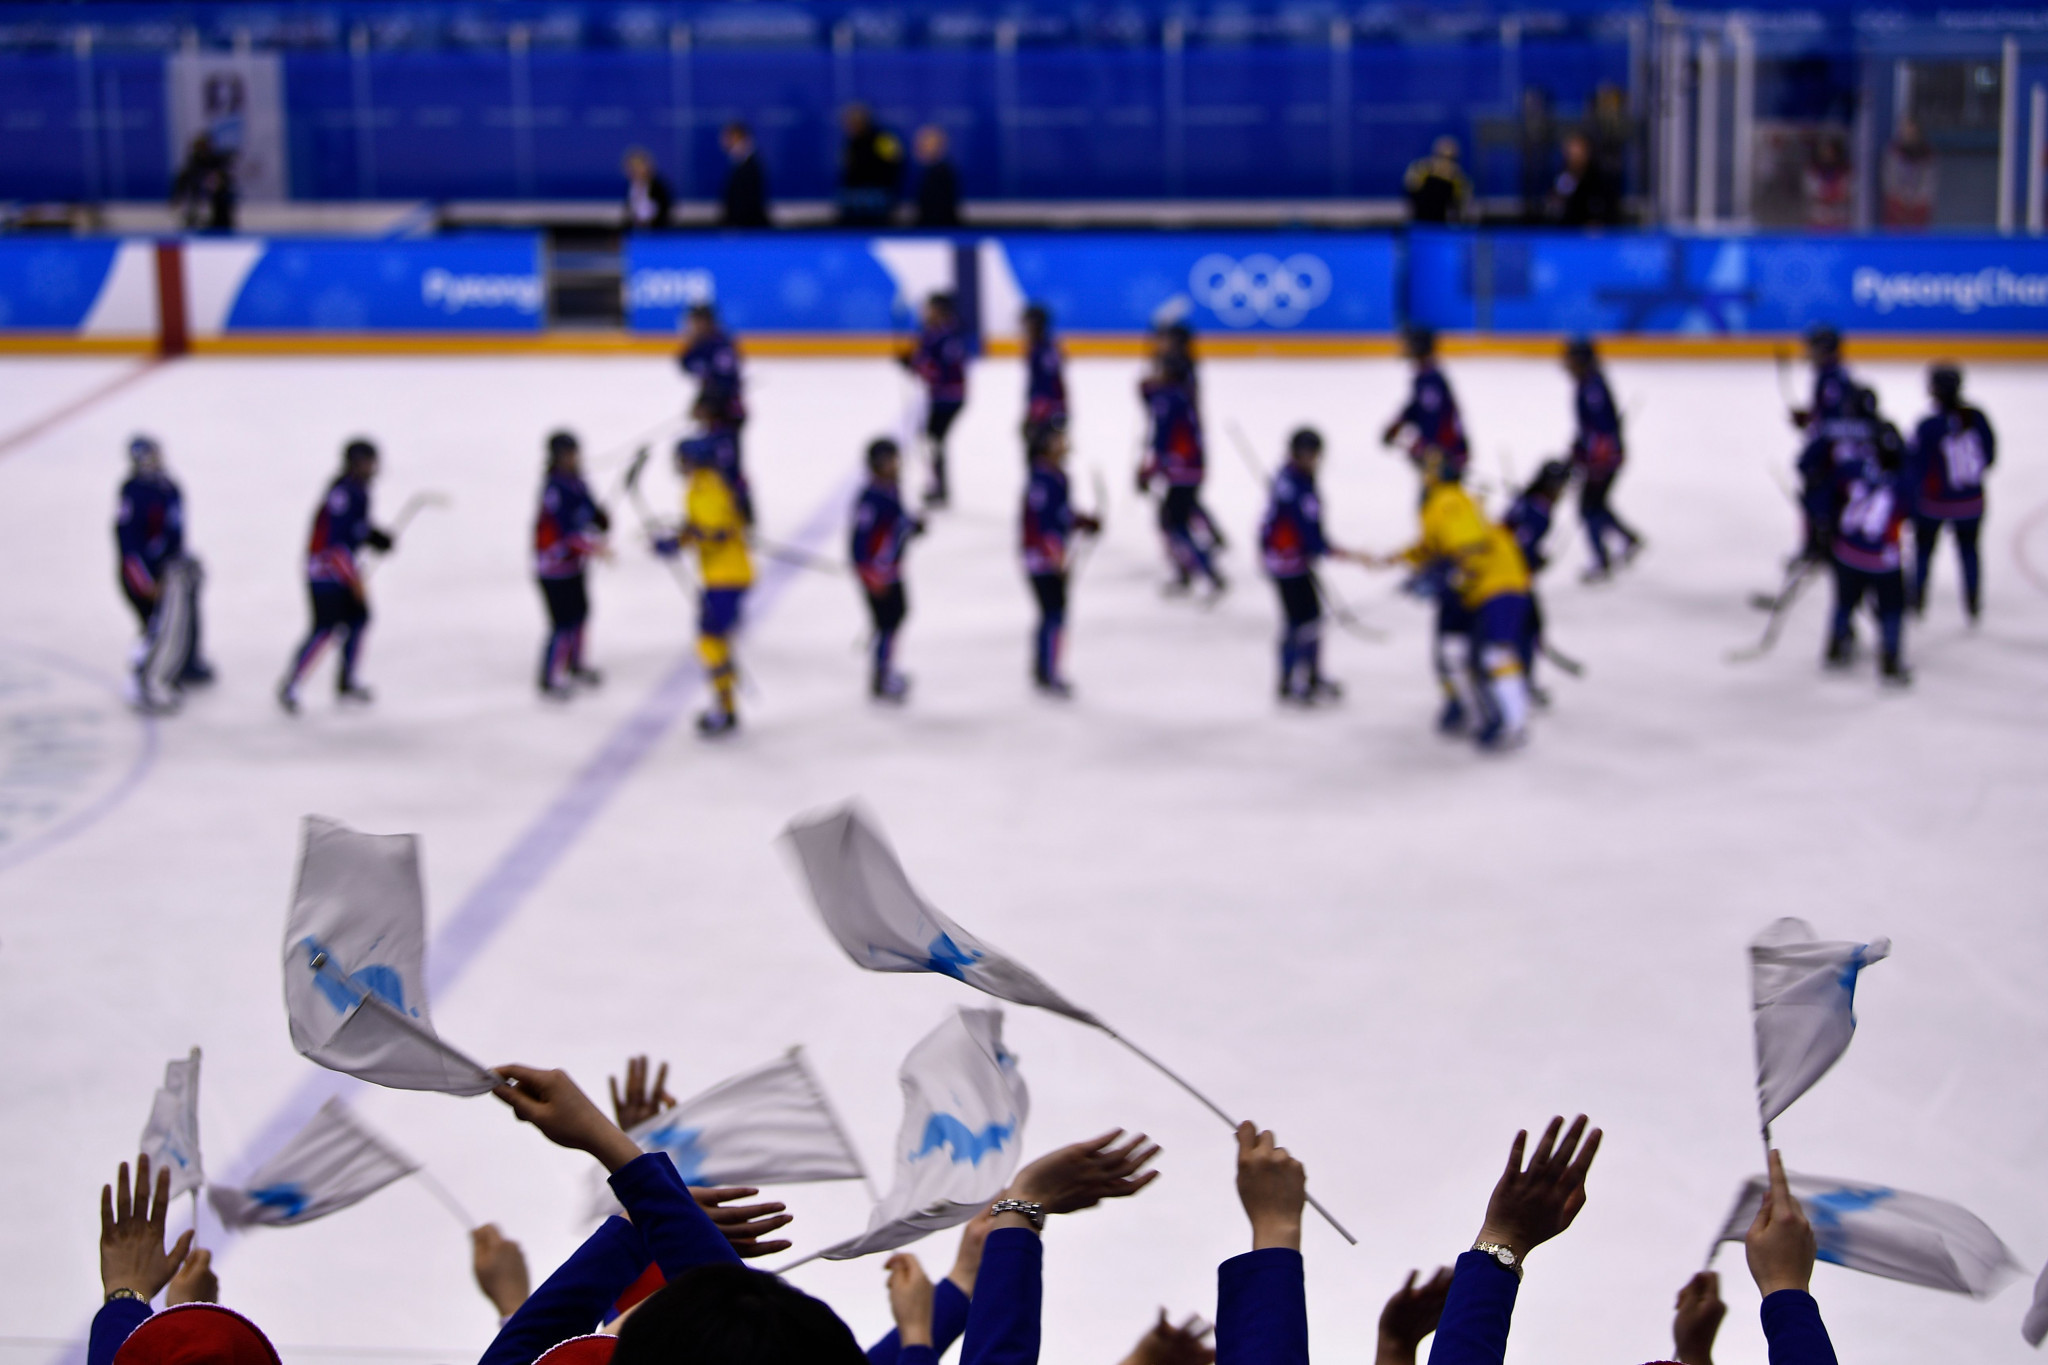 North and South Korea fielded a unified ice hockey team at the Pyeongchang 2018 Winter Olympic Games ©Getty Images